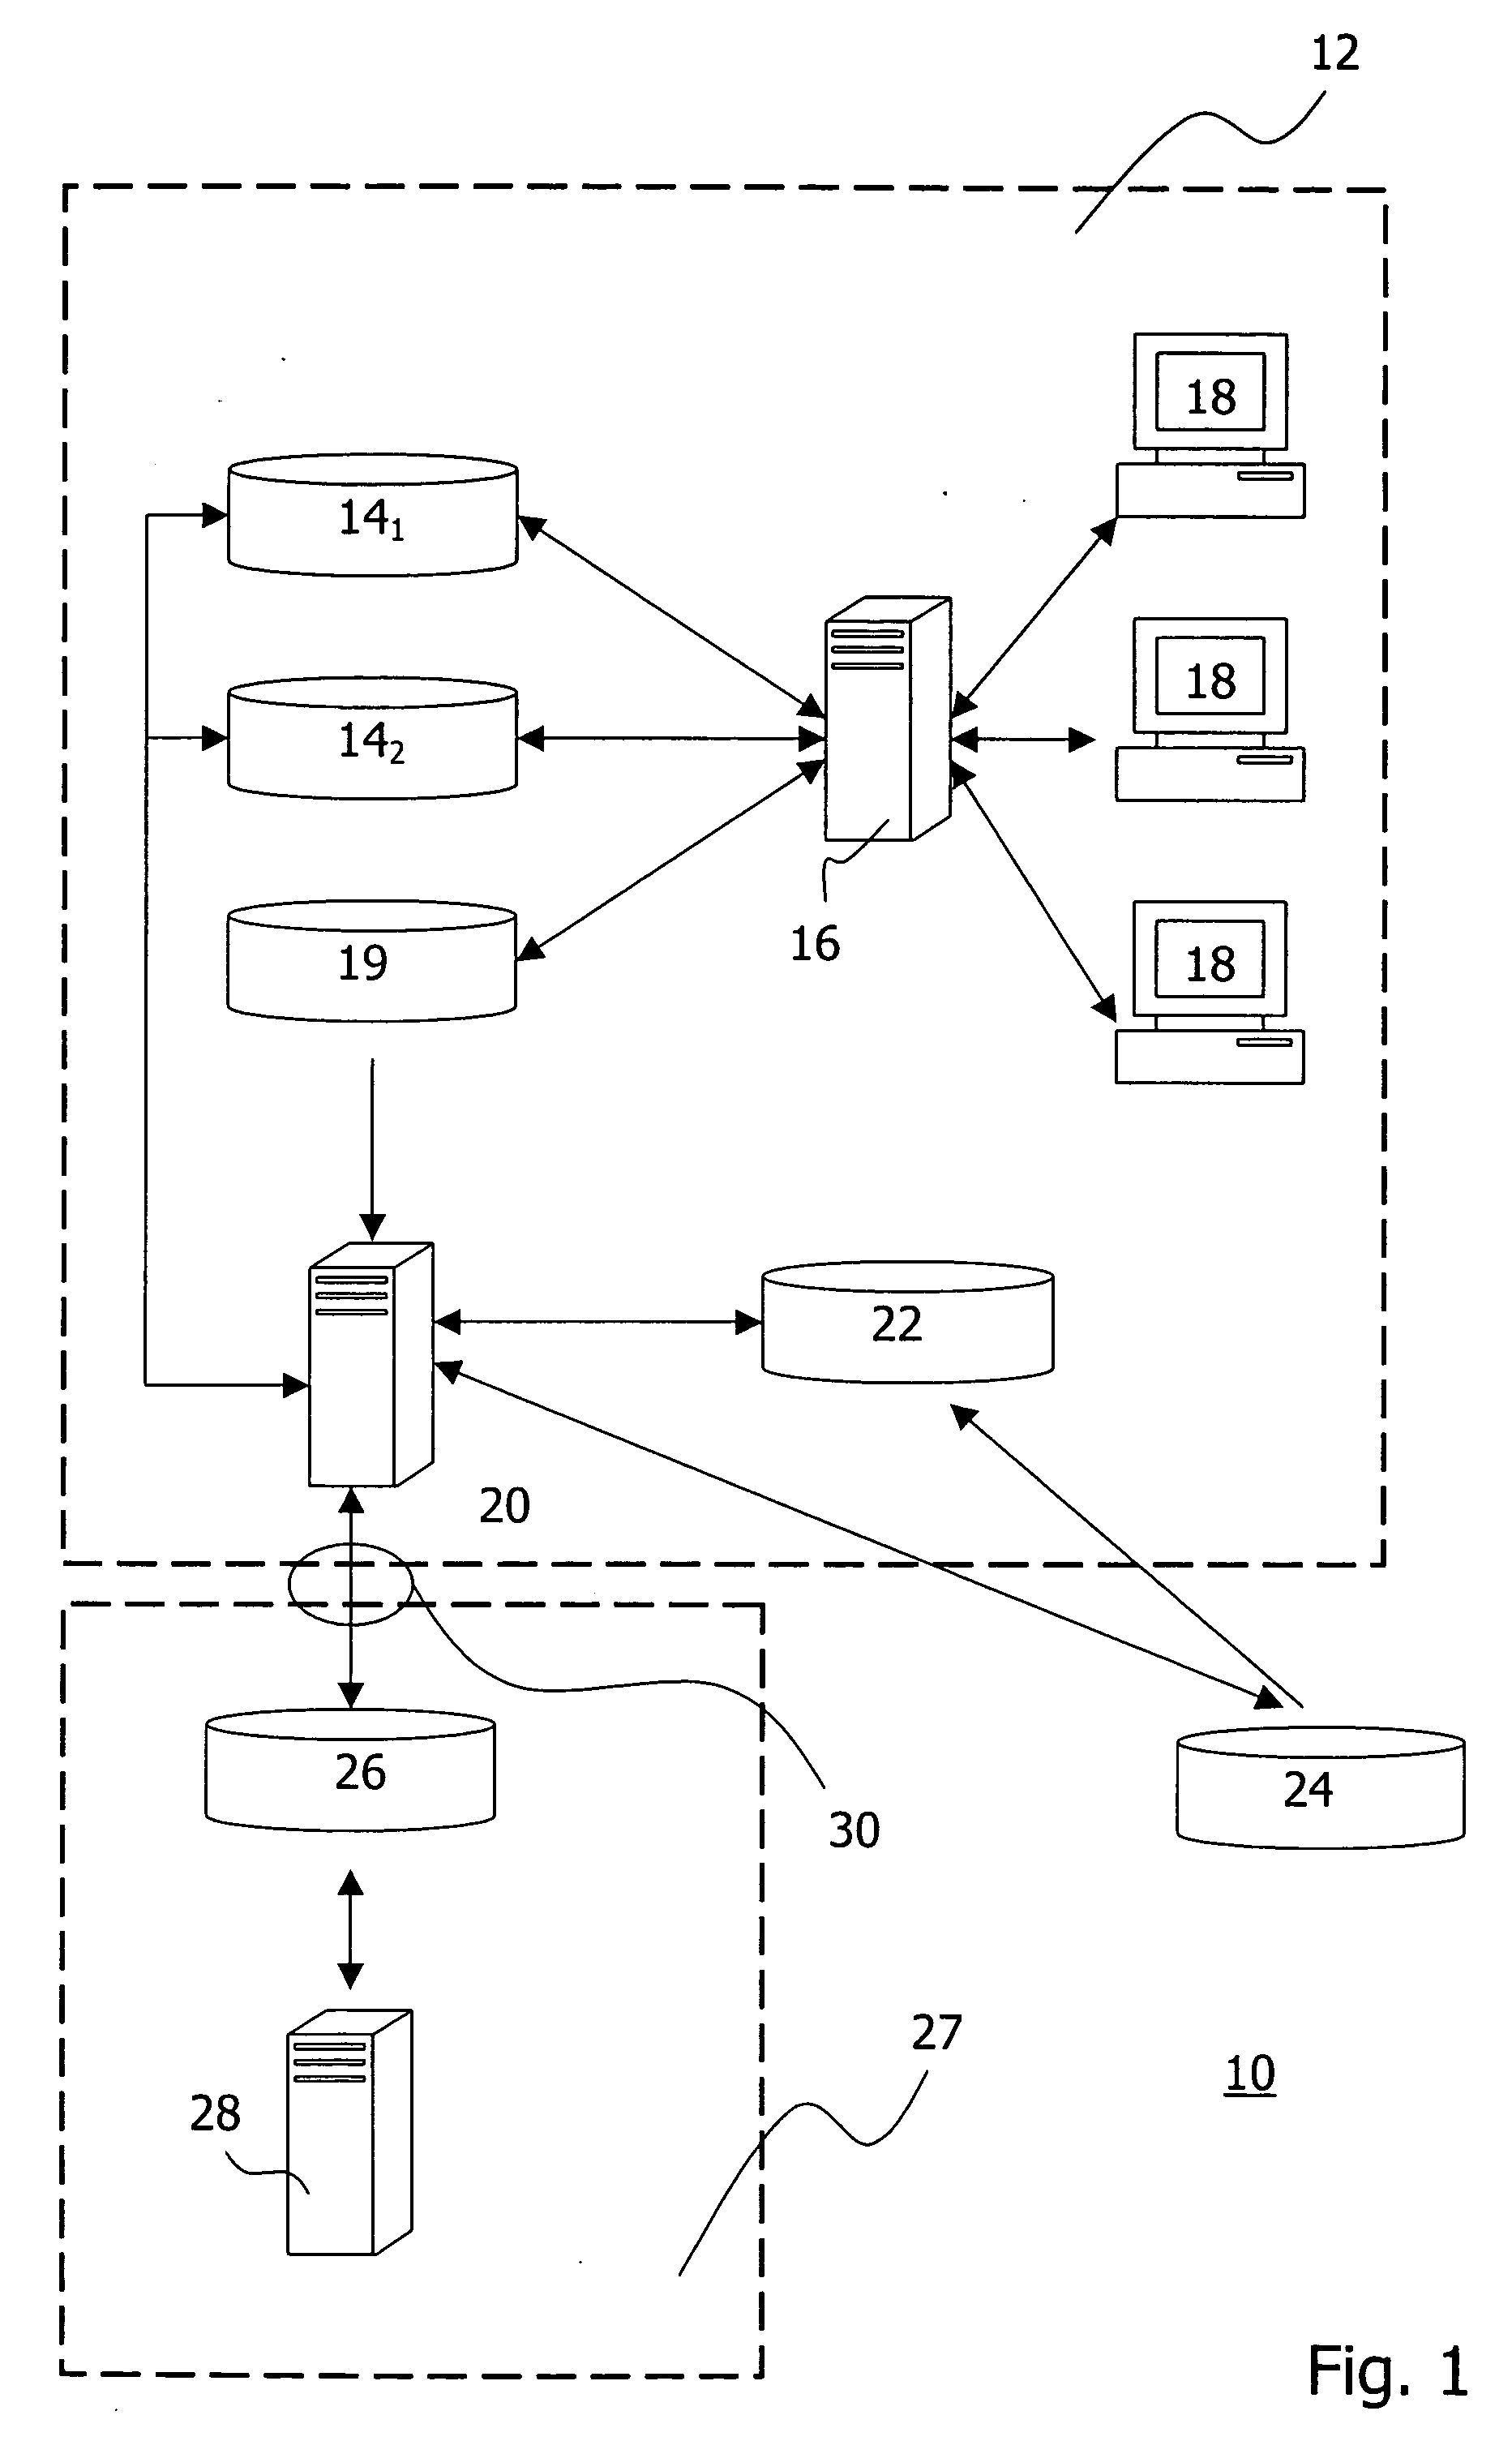 Generation of anonymized data records for testing and developing applications